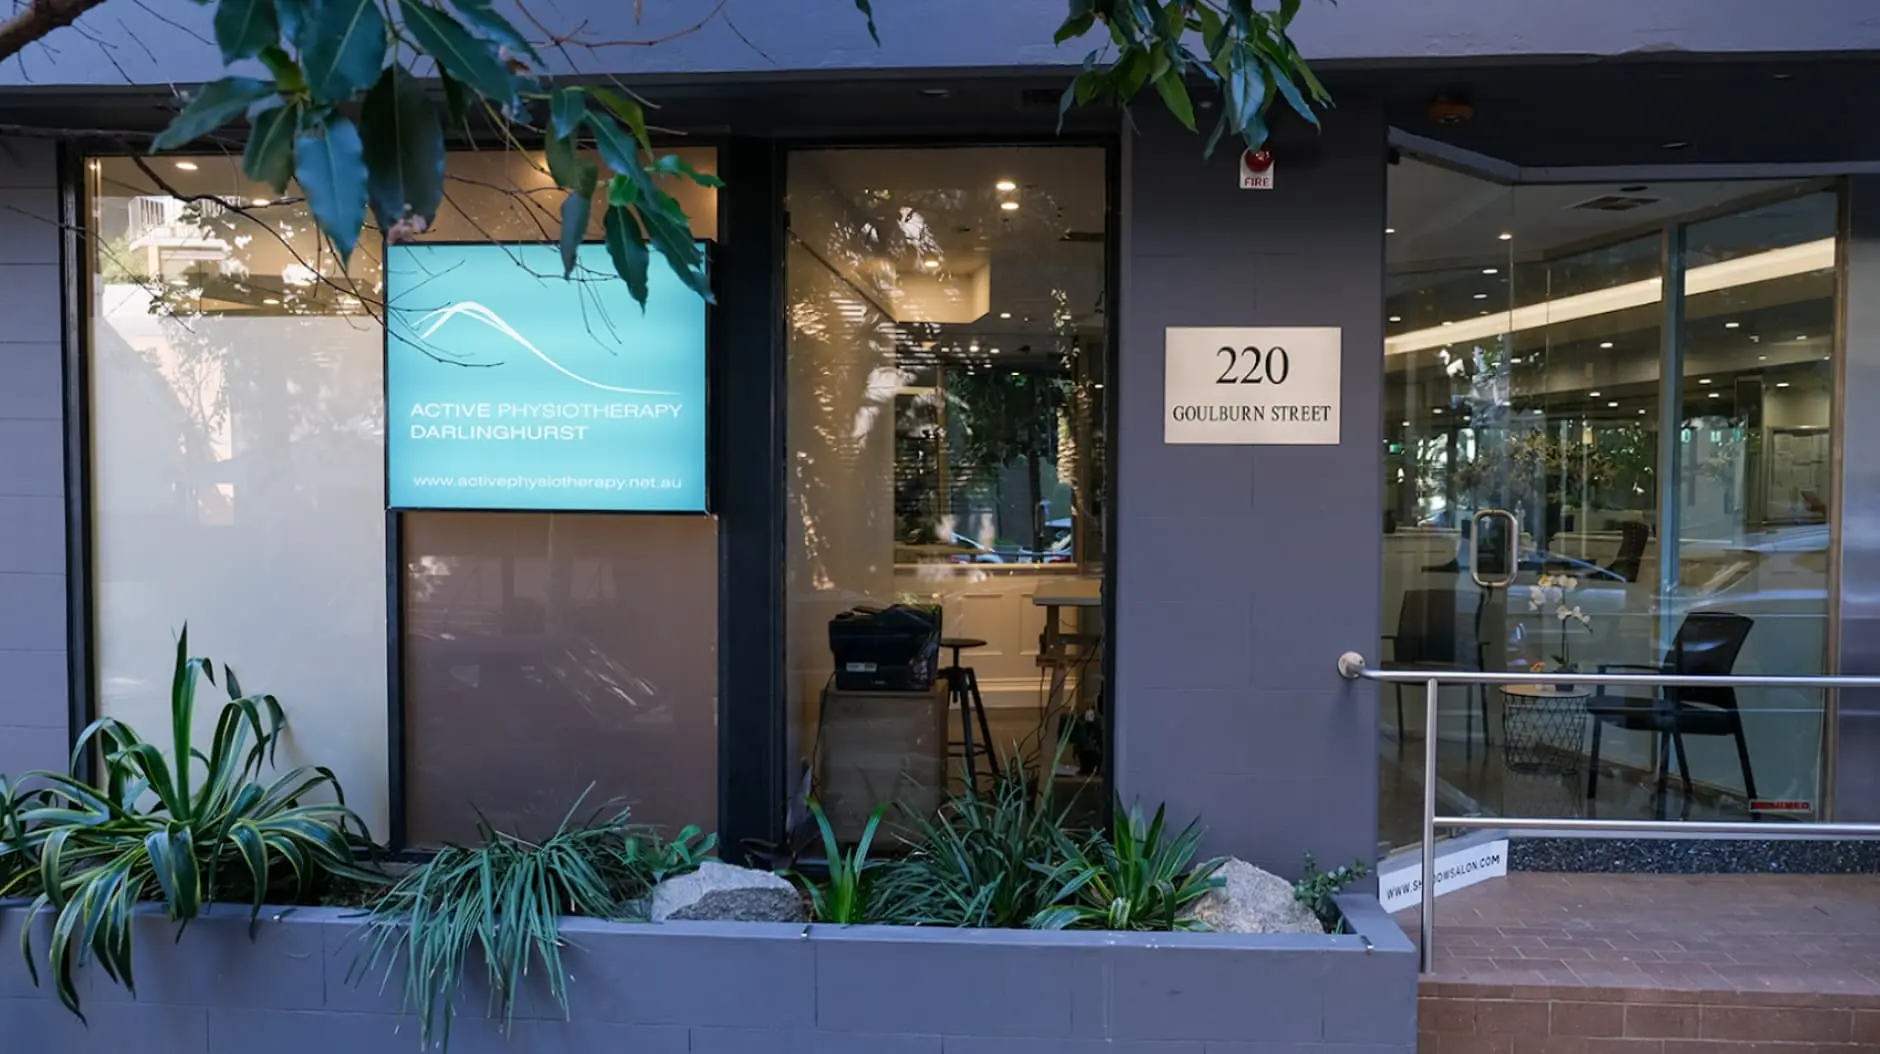 Front view of Darlinghurst Physiotheraphy's office location.